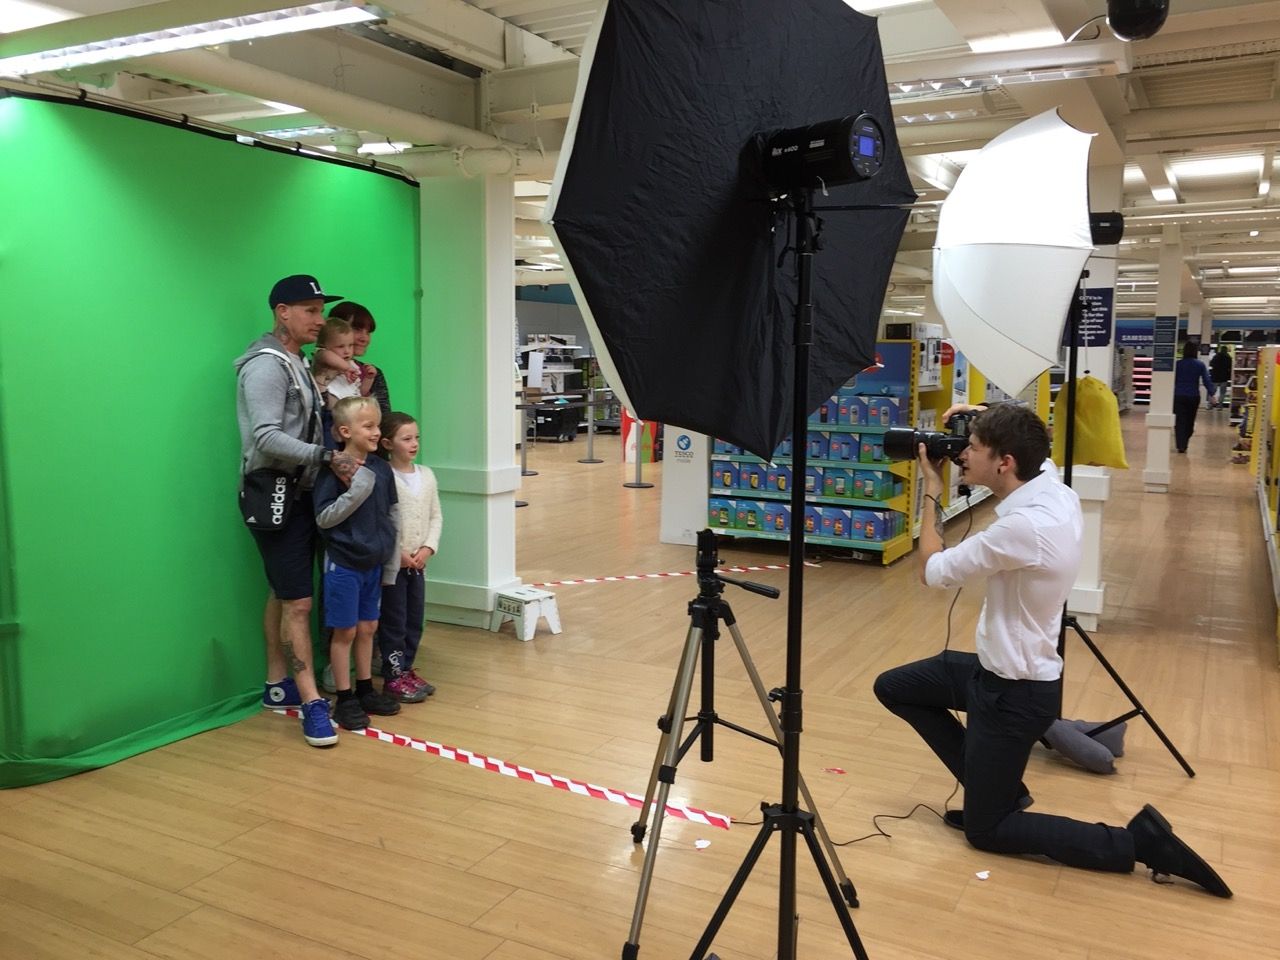 Green screen photographer setup in store for a brand activation and product launch